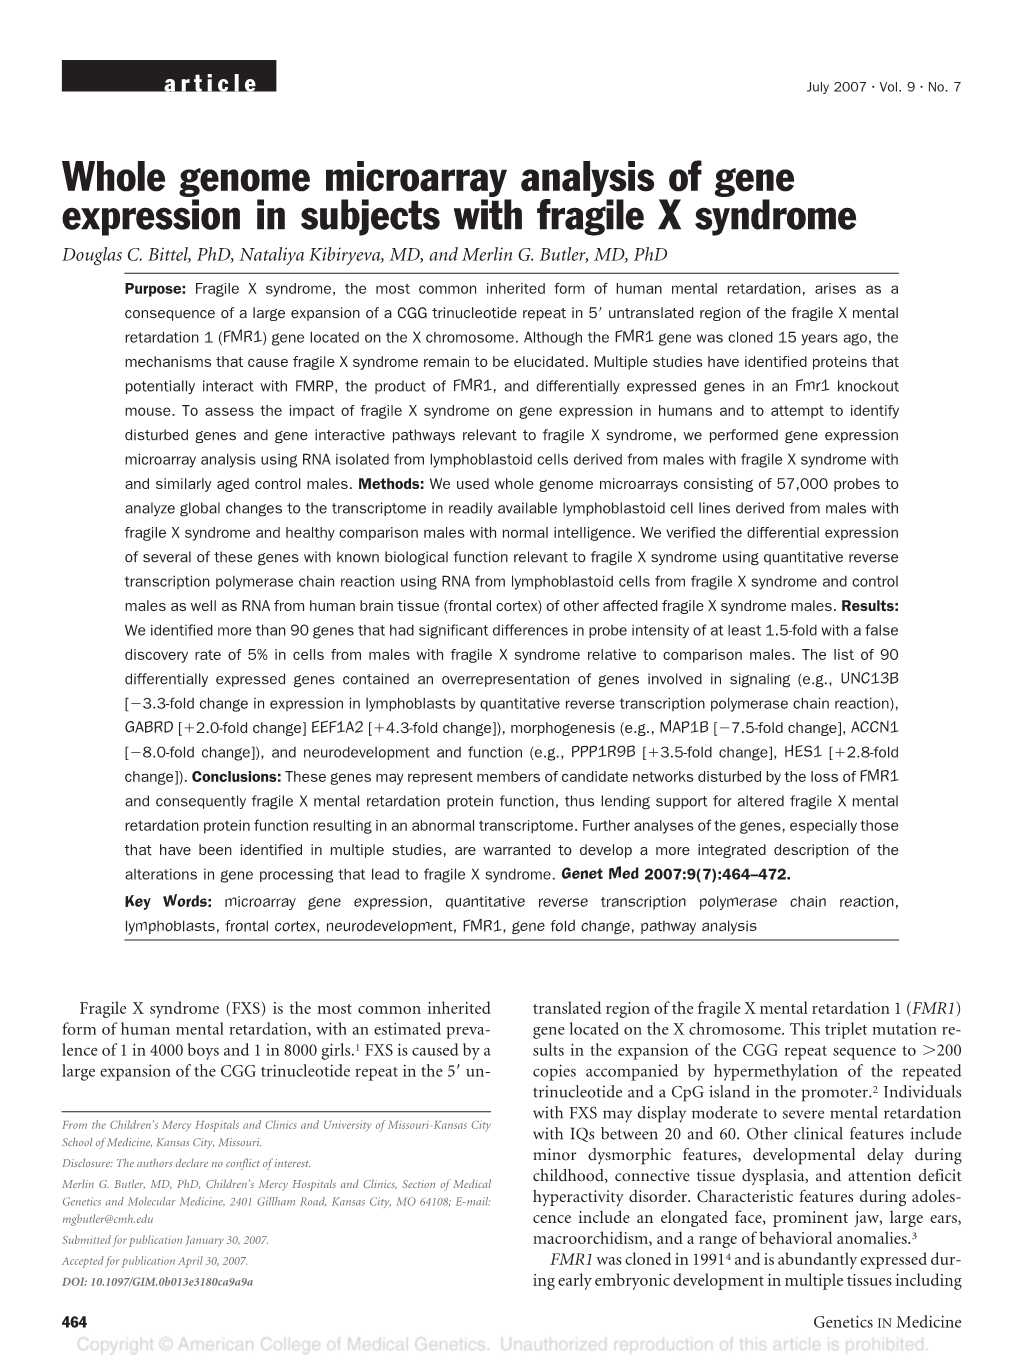 Whole Genome Microarray Analysis of Gene Expression in Subjects with Fragile X Syndrome Douglas C